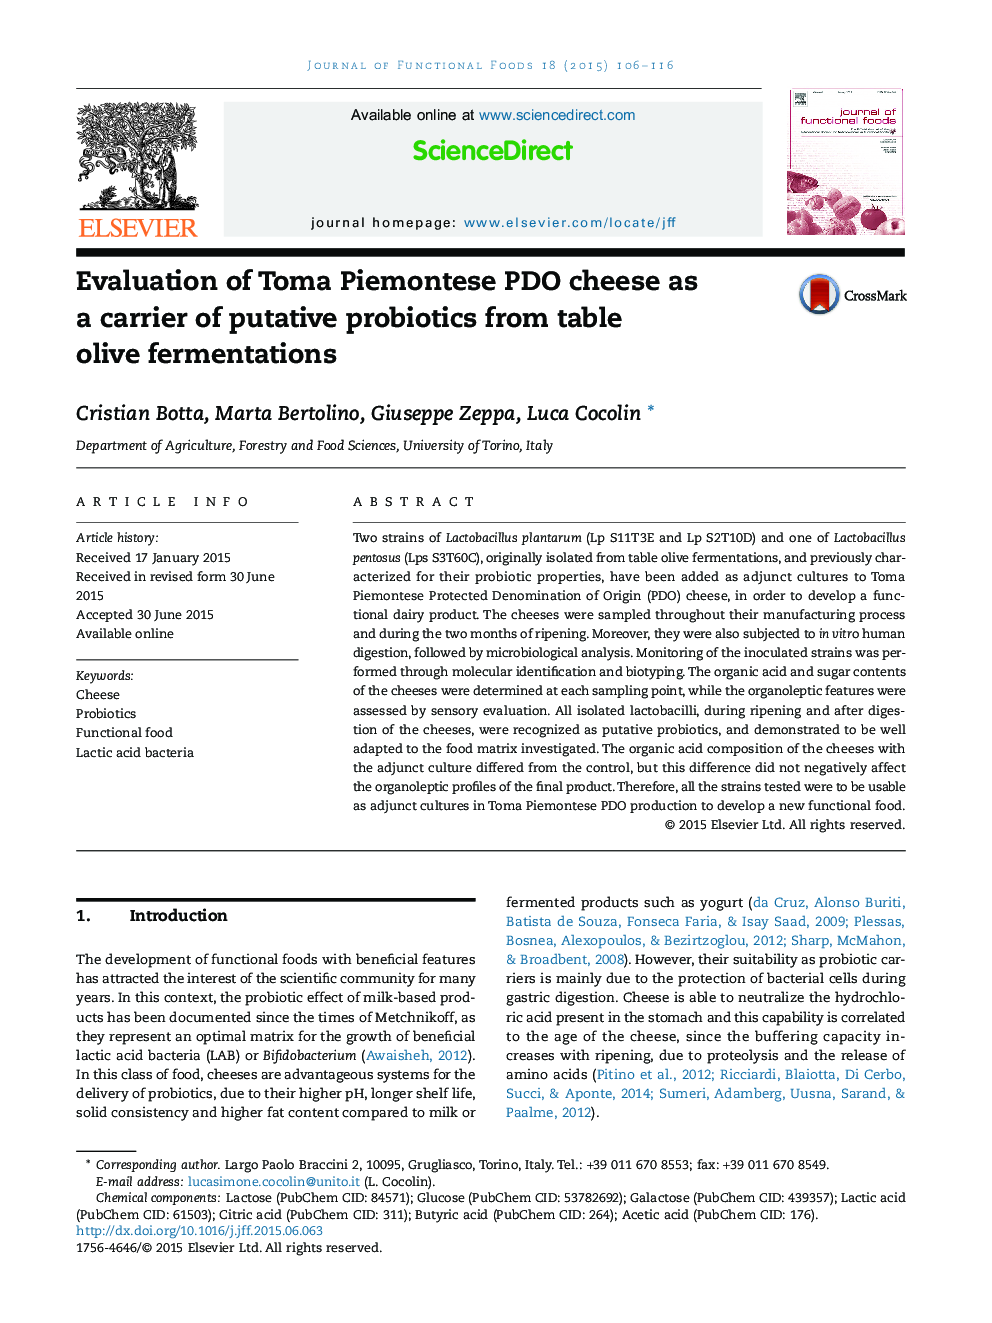 Evaluation of Toma Piemontese PDO cheese as a carrier of putative probiotics from table olive fermentations